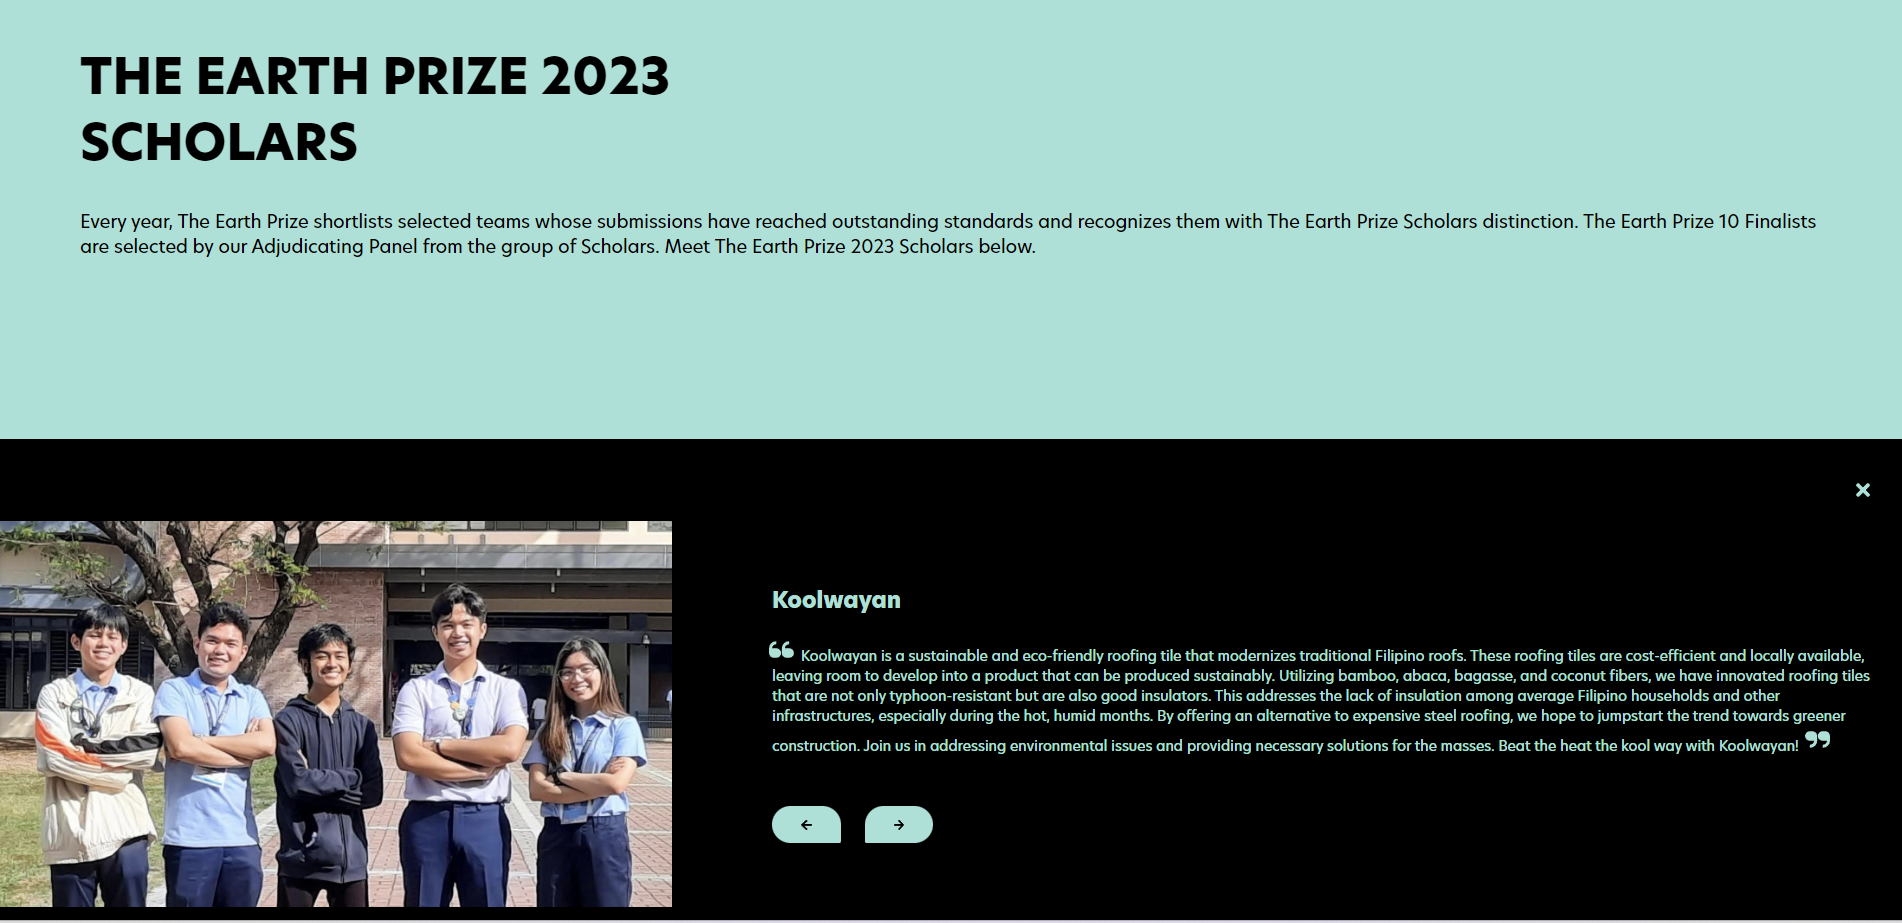 Screenshot of the "Koolwayan" team and their project's description as seen in The Earth Prize website.